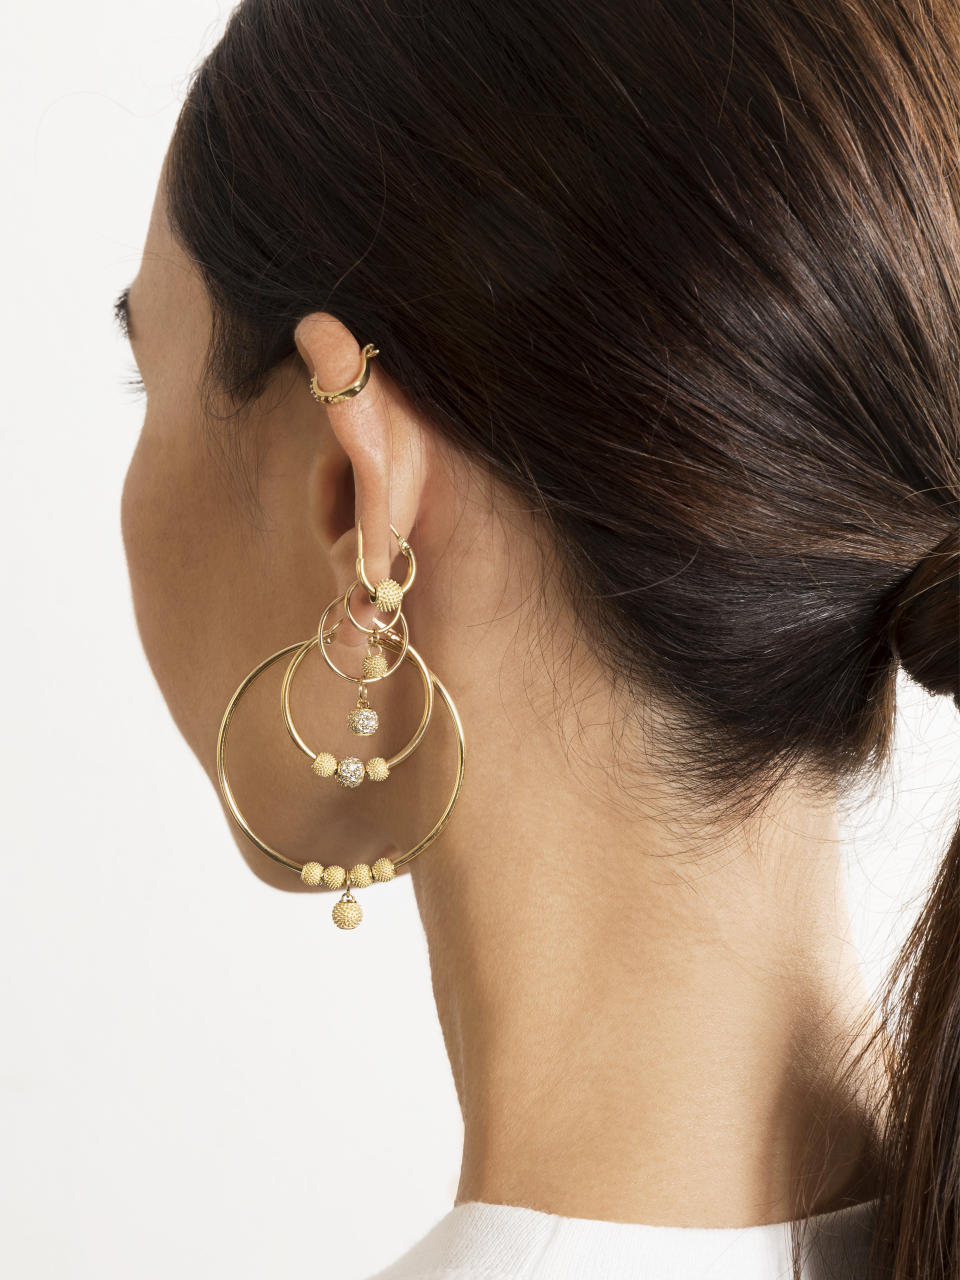 Earrings from the Annarita Celano sustainable jewelry collection. - Credit: Courtesy of Annarita Celano